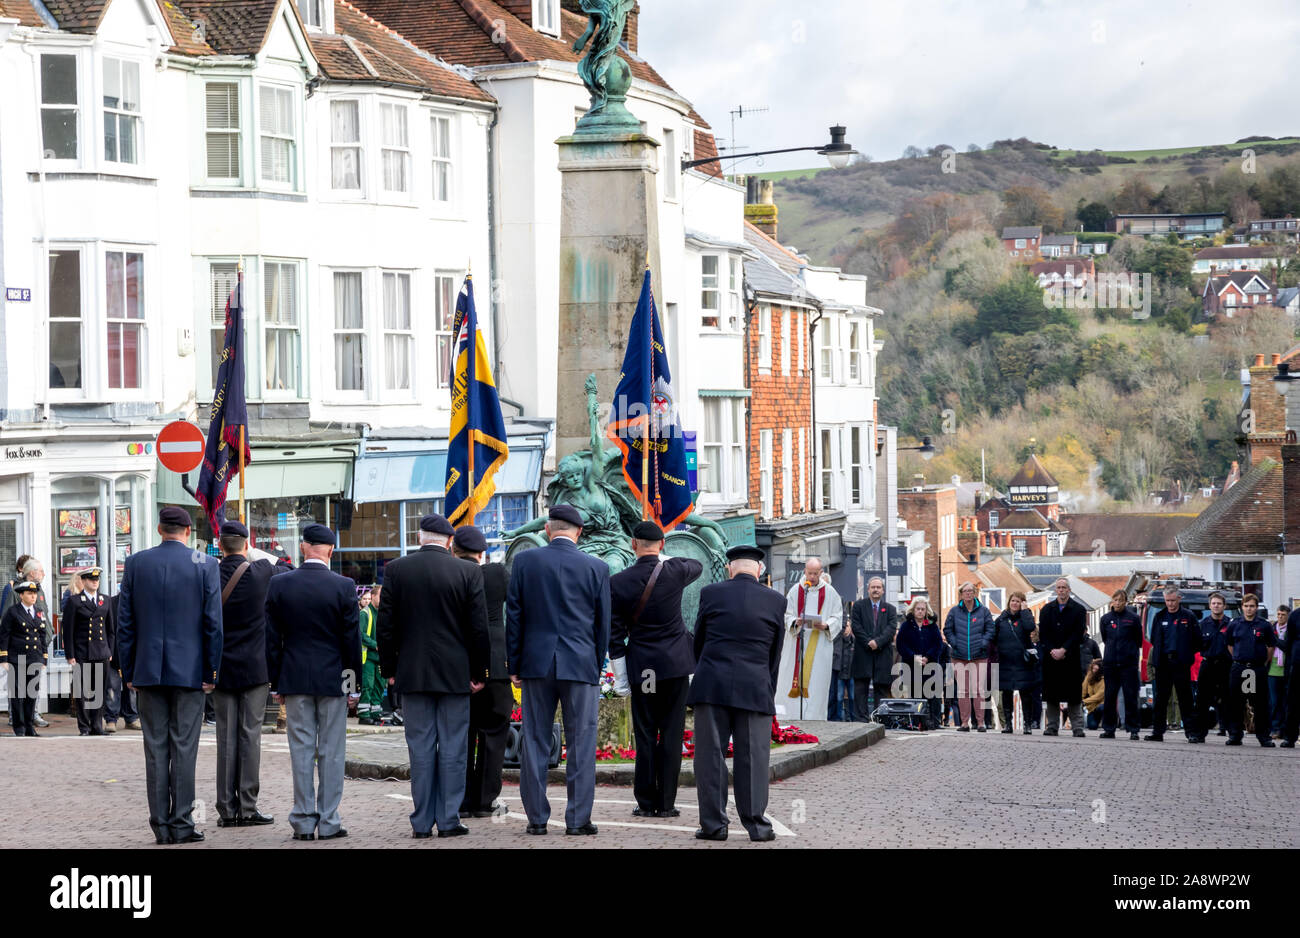 Lewes, East Sussex, UK. 11th November, 2019. As people gathered to remember the war dead and observe a minutes silence a local man disrupted the proceeding by spitting towards a member of the Church as he performed the readings in front of the towns War Memorial. Sussex police officers spoke with the individual concerned. Credit: Alan Fraser/Alamy Live News Stock Photo